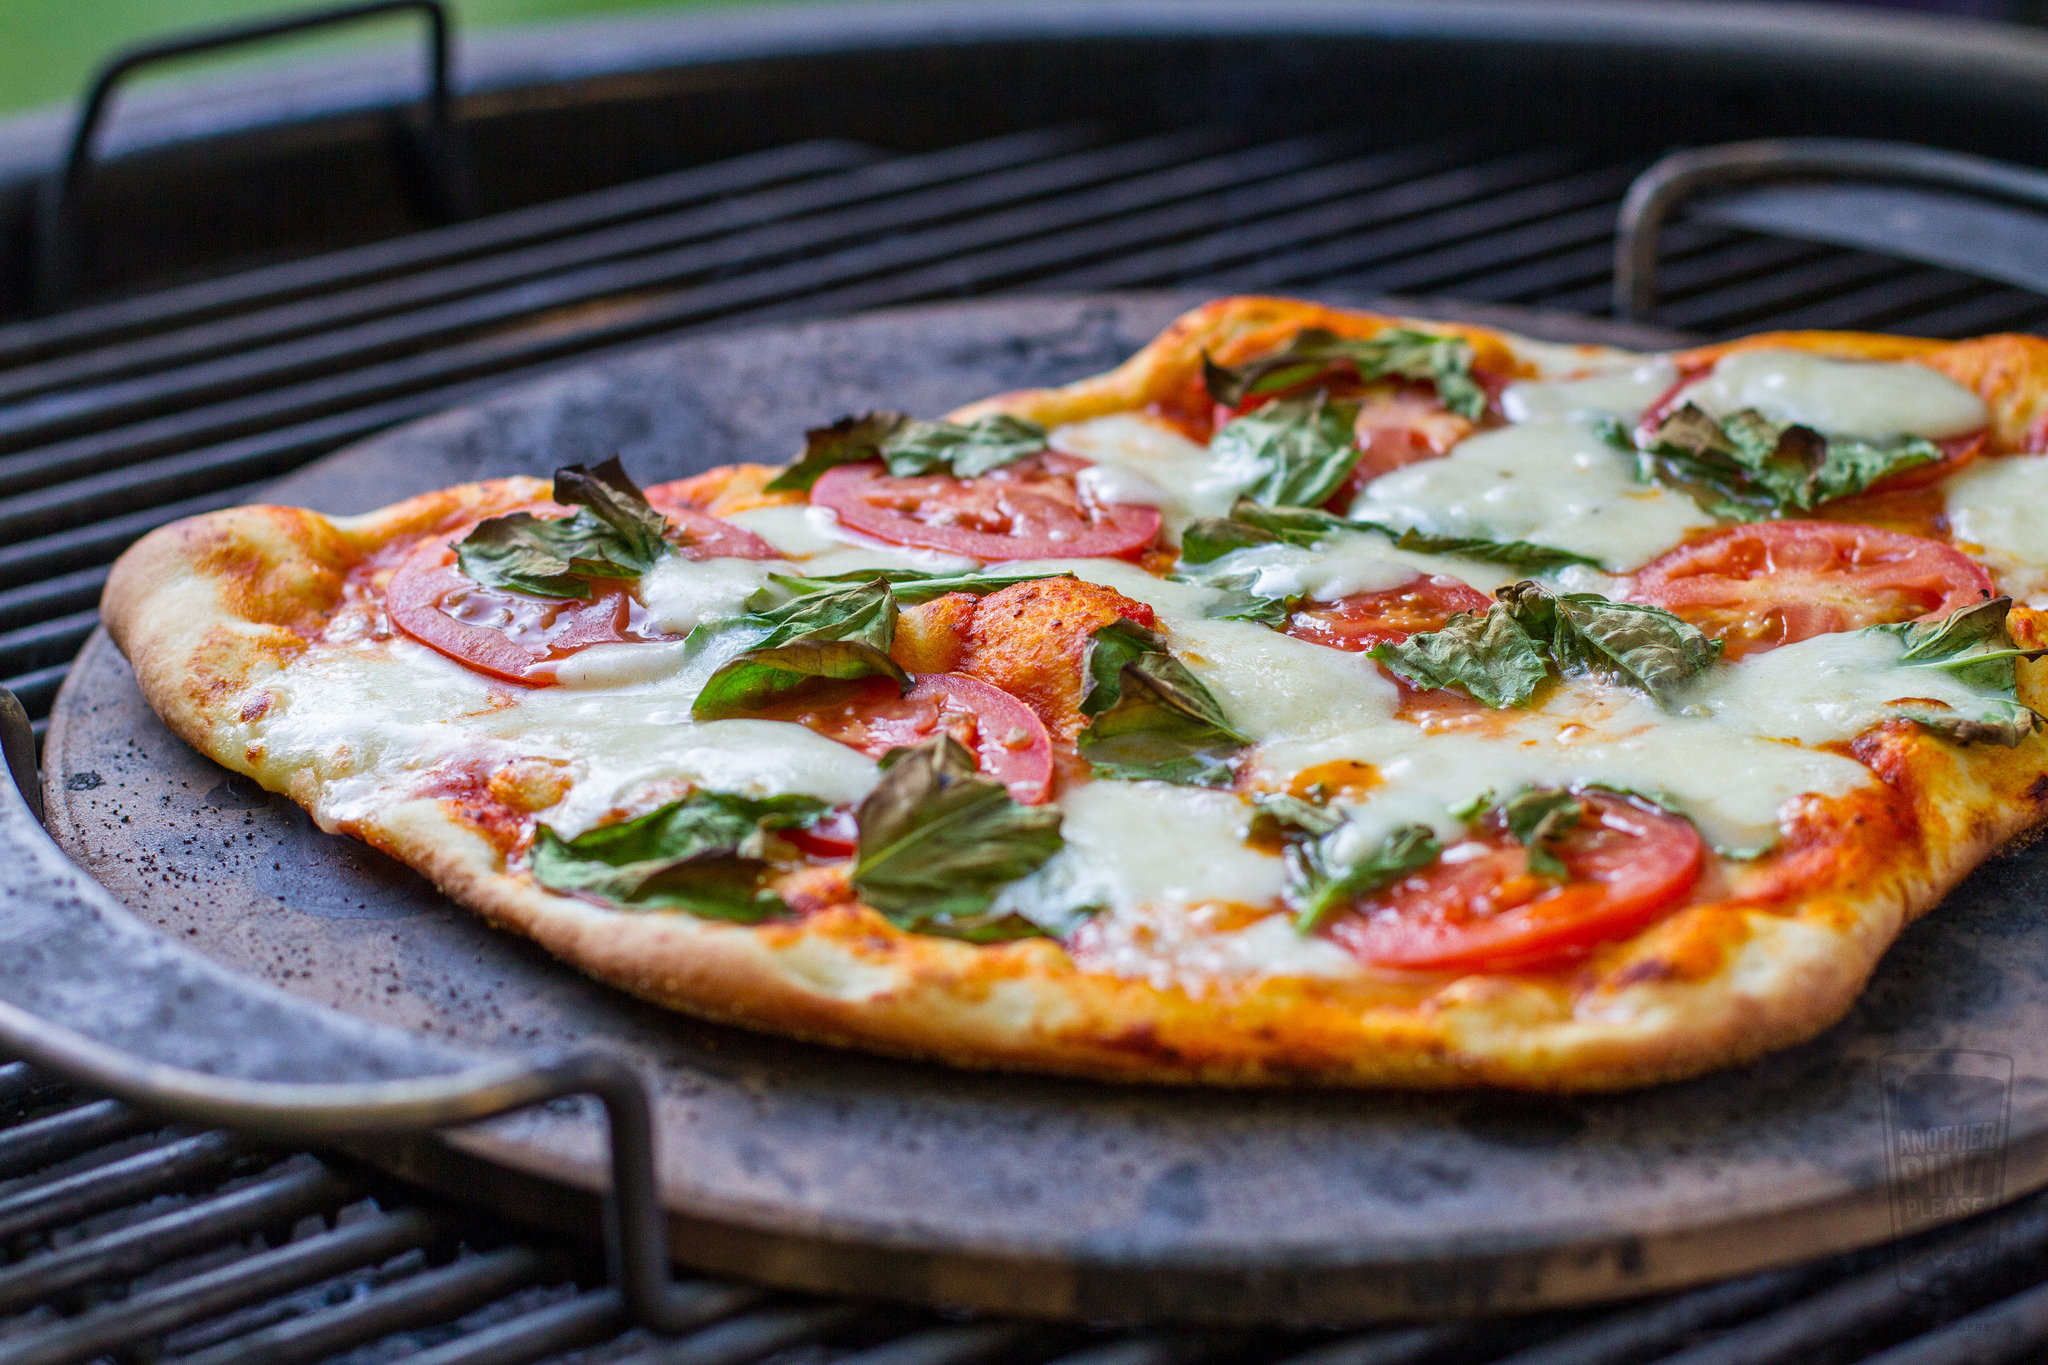 Sudan Centralisere Fancy kjole Grilled Pizza on the Weber Summit Charcoal Grill — Another Pint Please